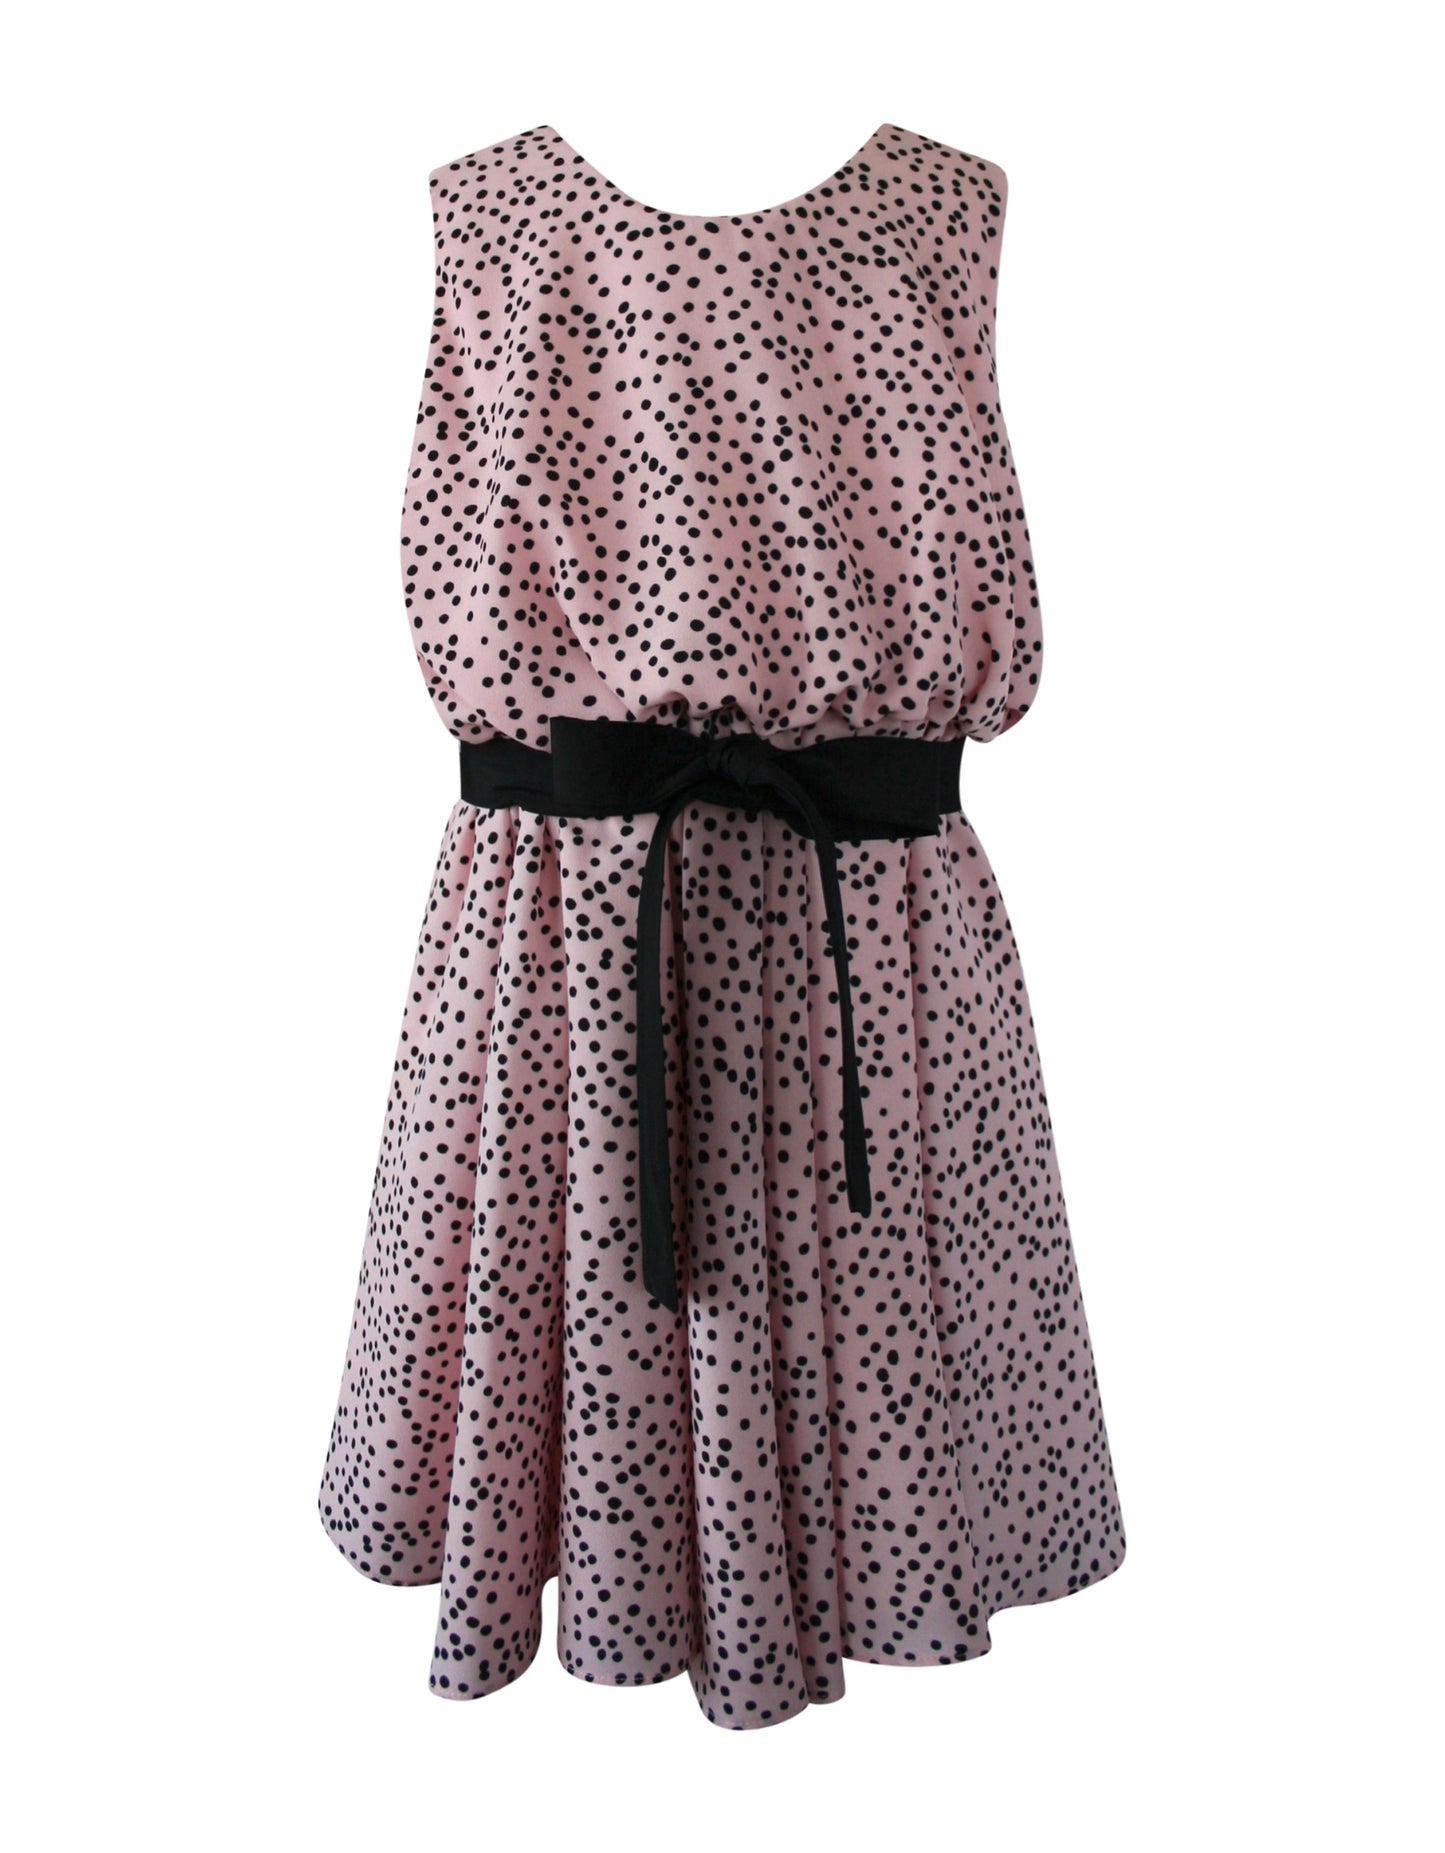 Helena and Harry Girl's Pink with Black Dots Dress